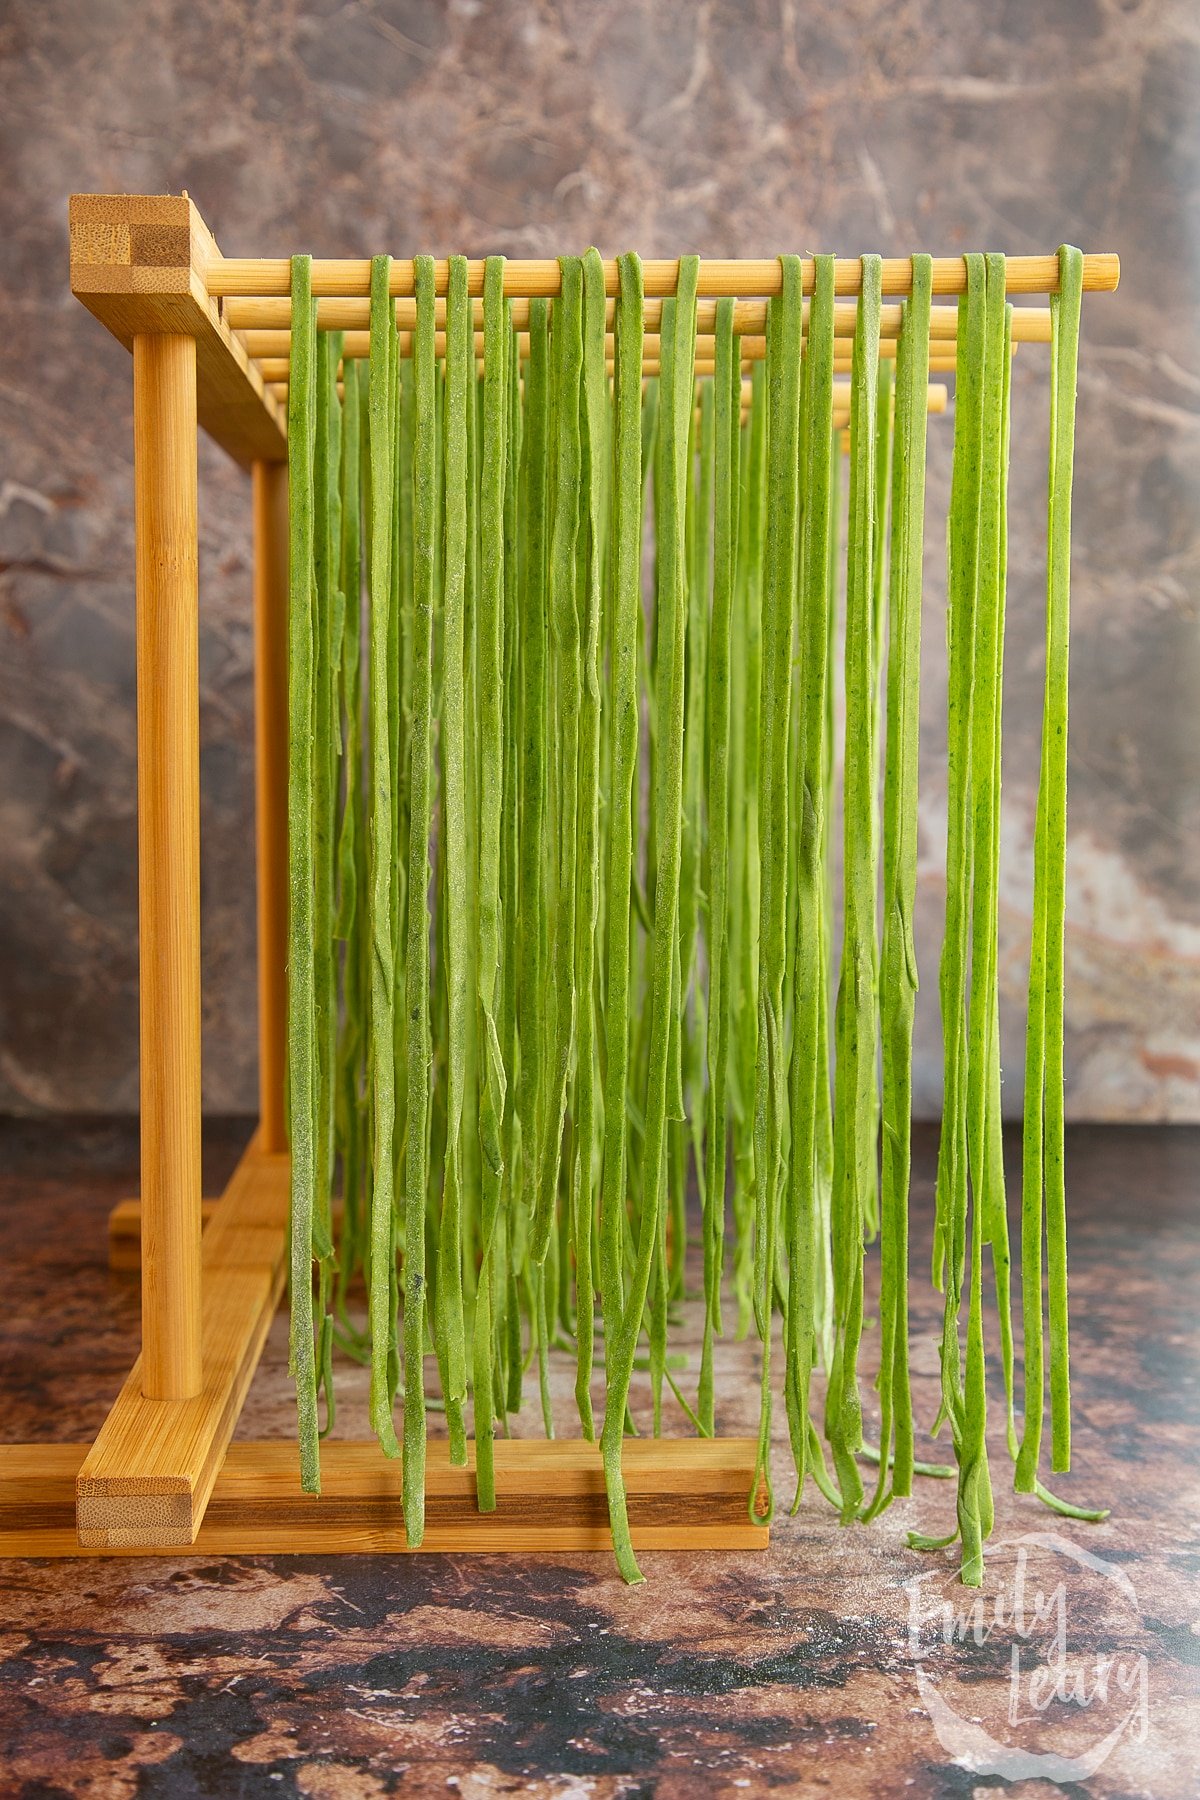 green Tagliatelle hung from a wooden pasta rack